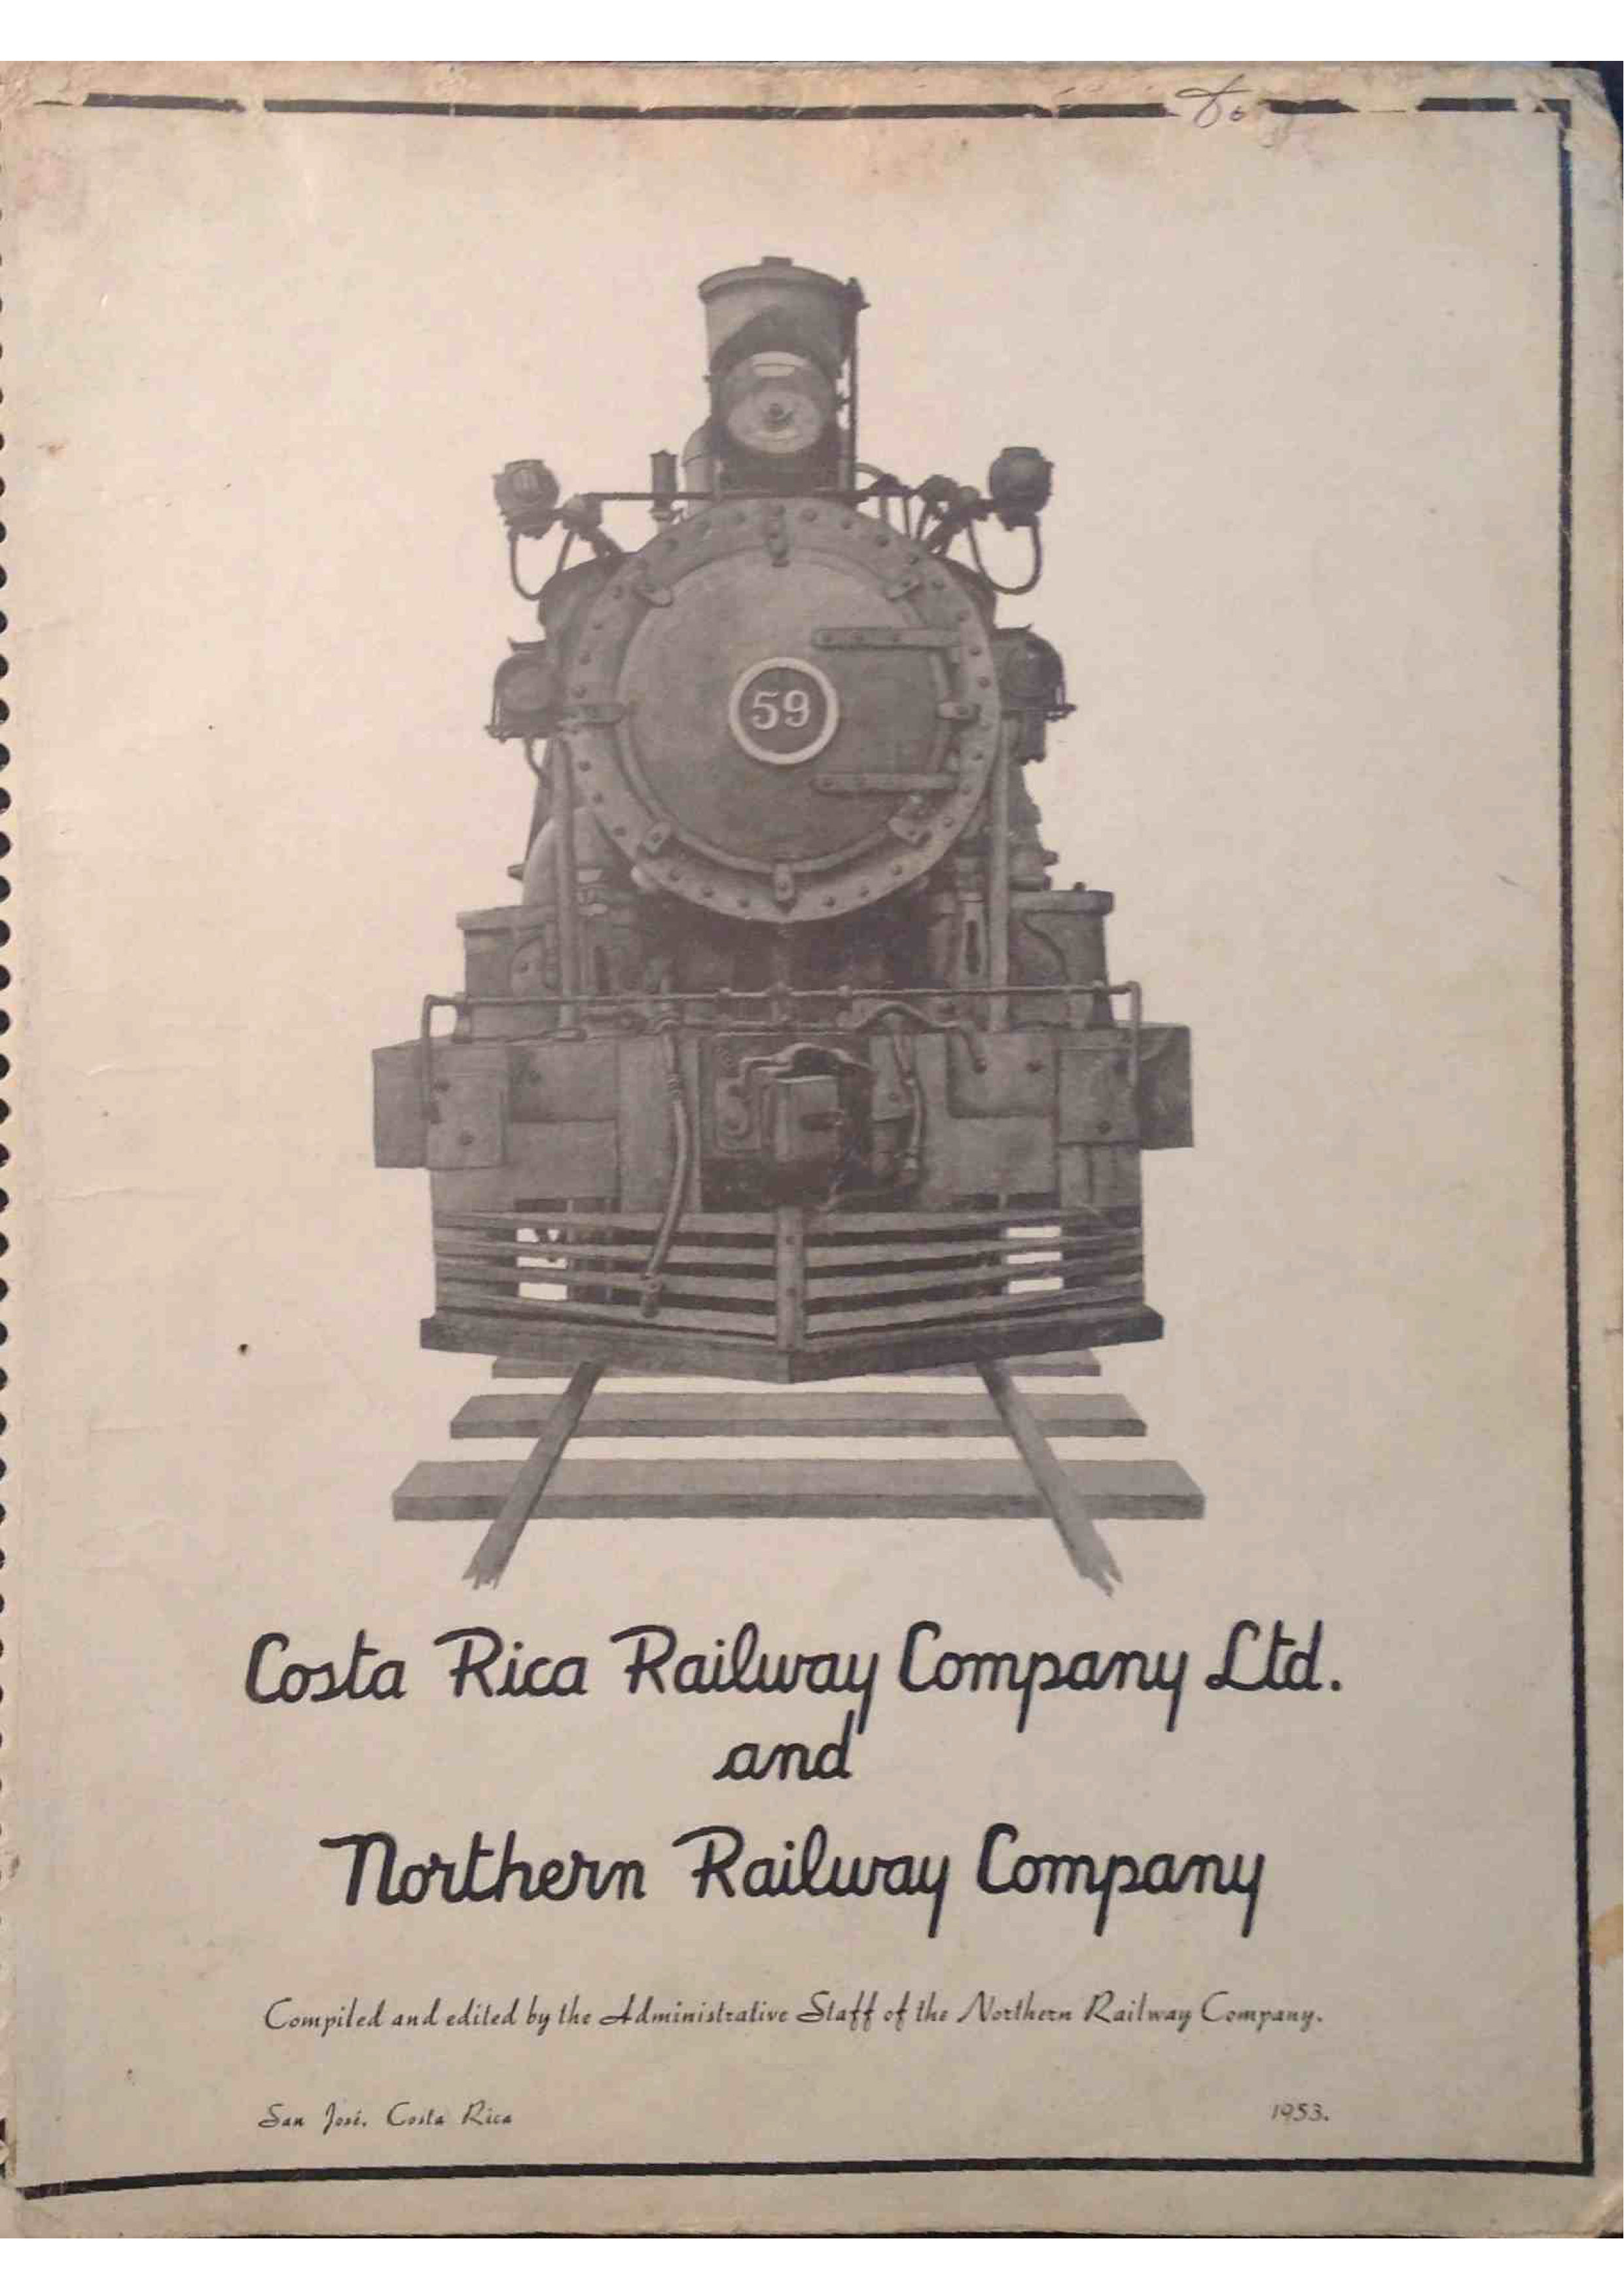 Costa Rica railway co 1953 from Davila fam partial scan_Page_01.jpg